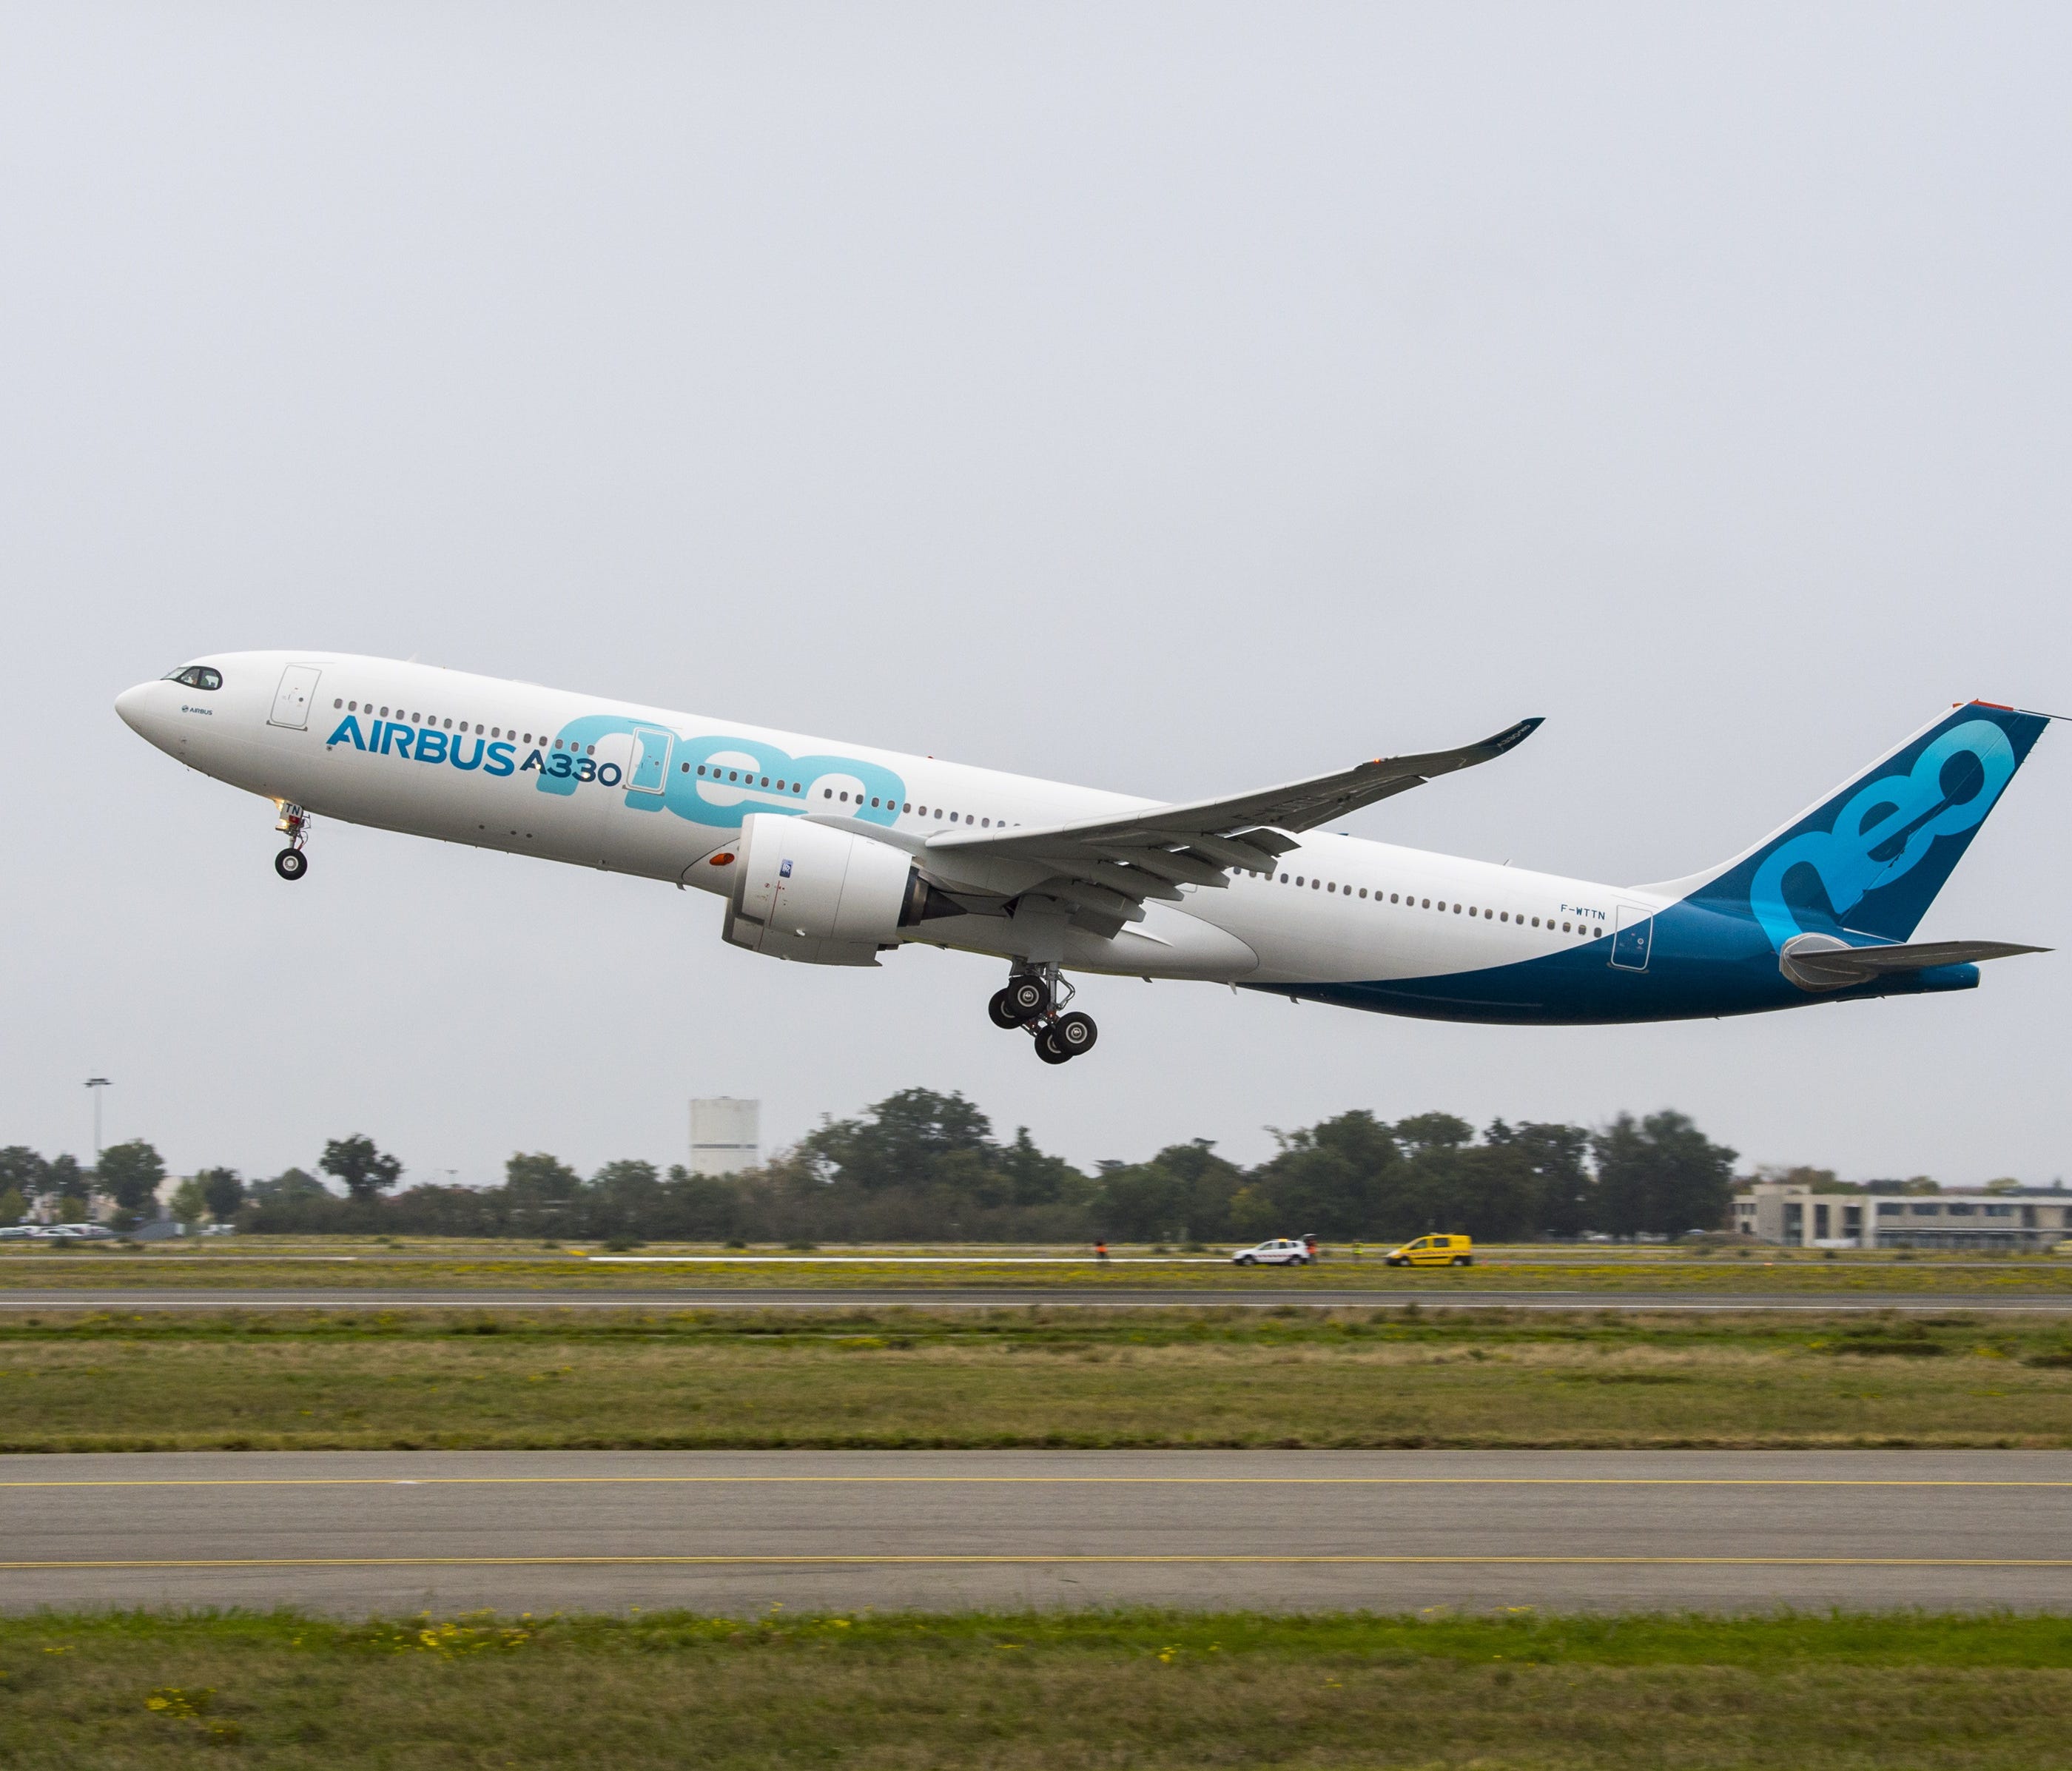 Airbus's first Airbus A330neo departs on its maiden flight Thursday, Oct. 19, 2017, in Toulouse, France.